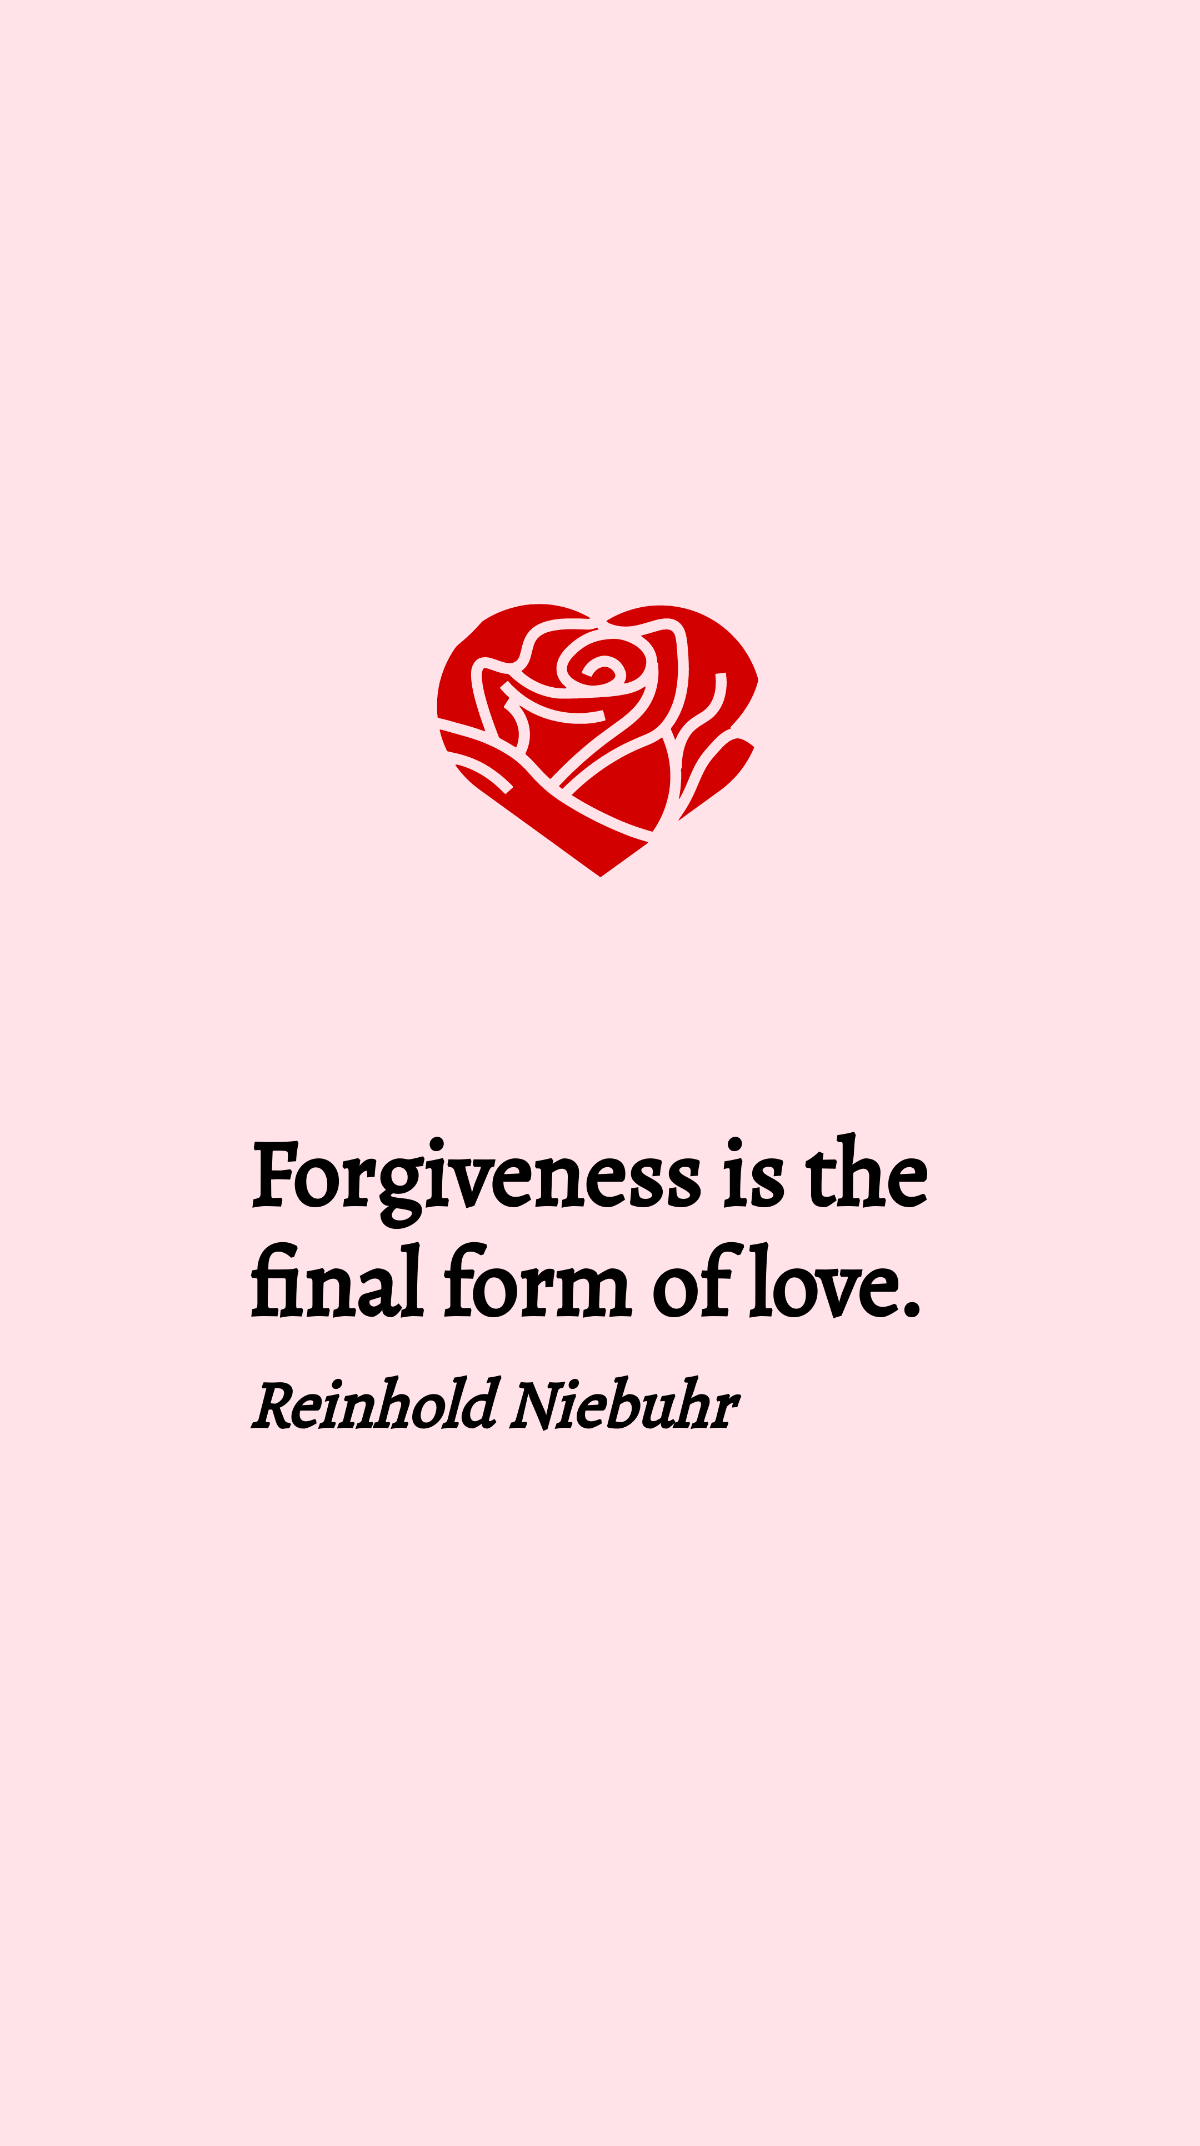 Free Reinhold Niebuhr - Forgiveness is the final form of love. Template